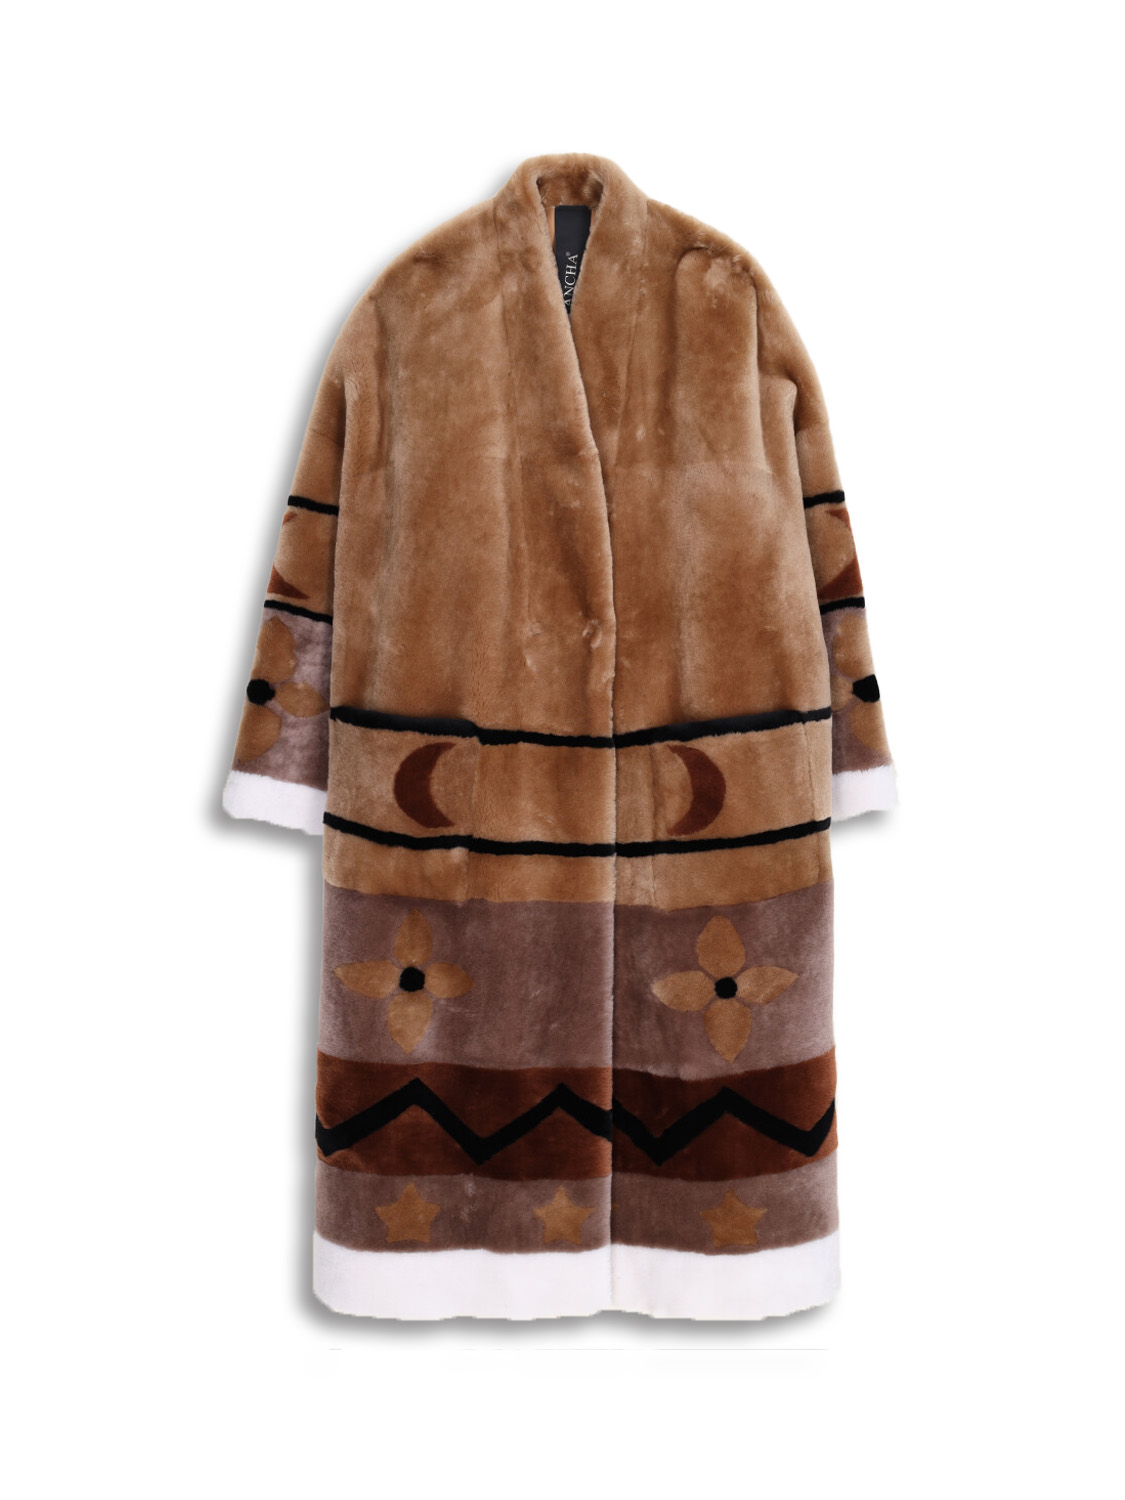 Sheepskin coat with moon and stripes design